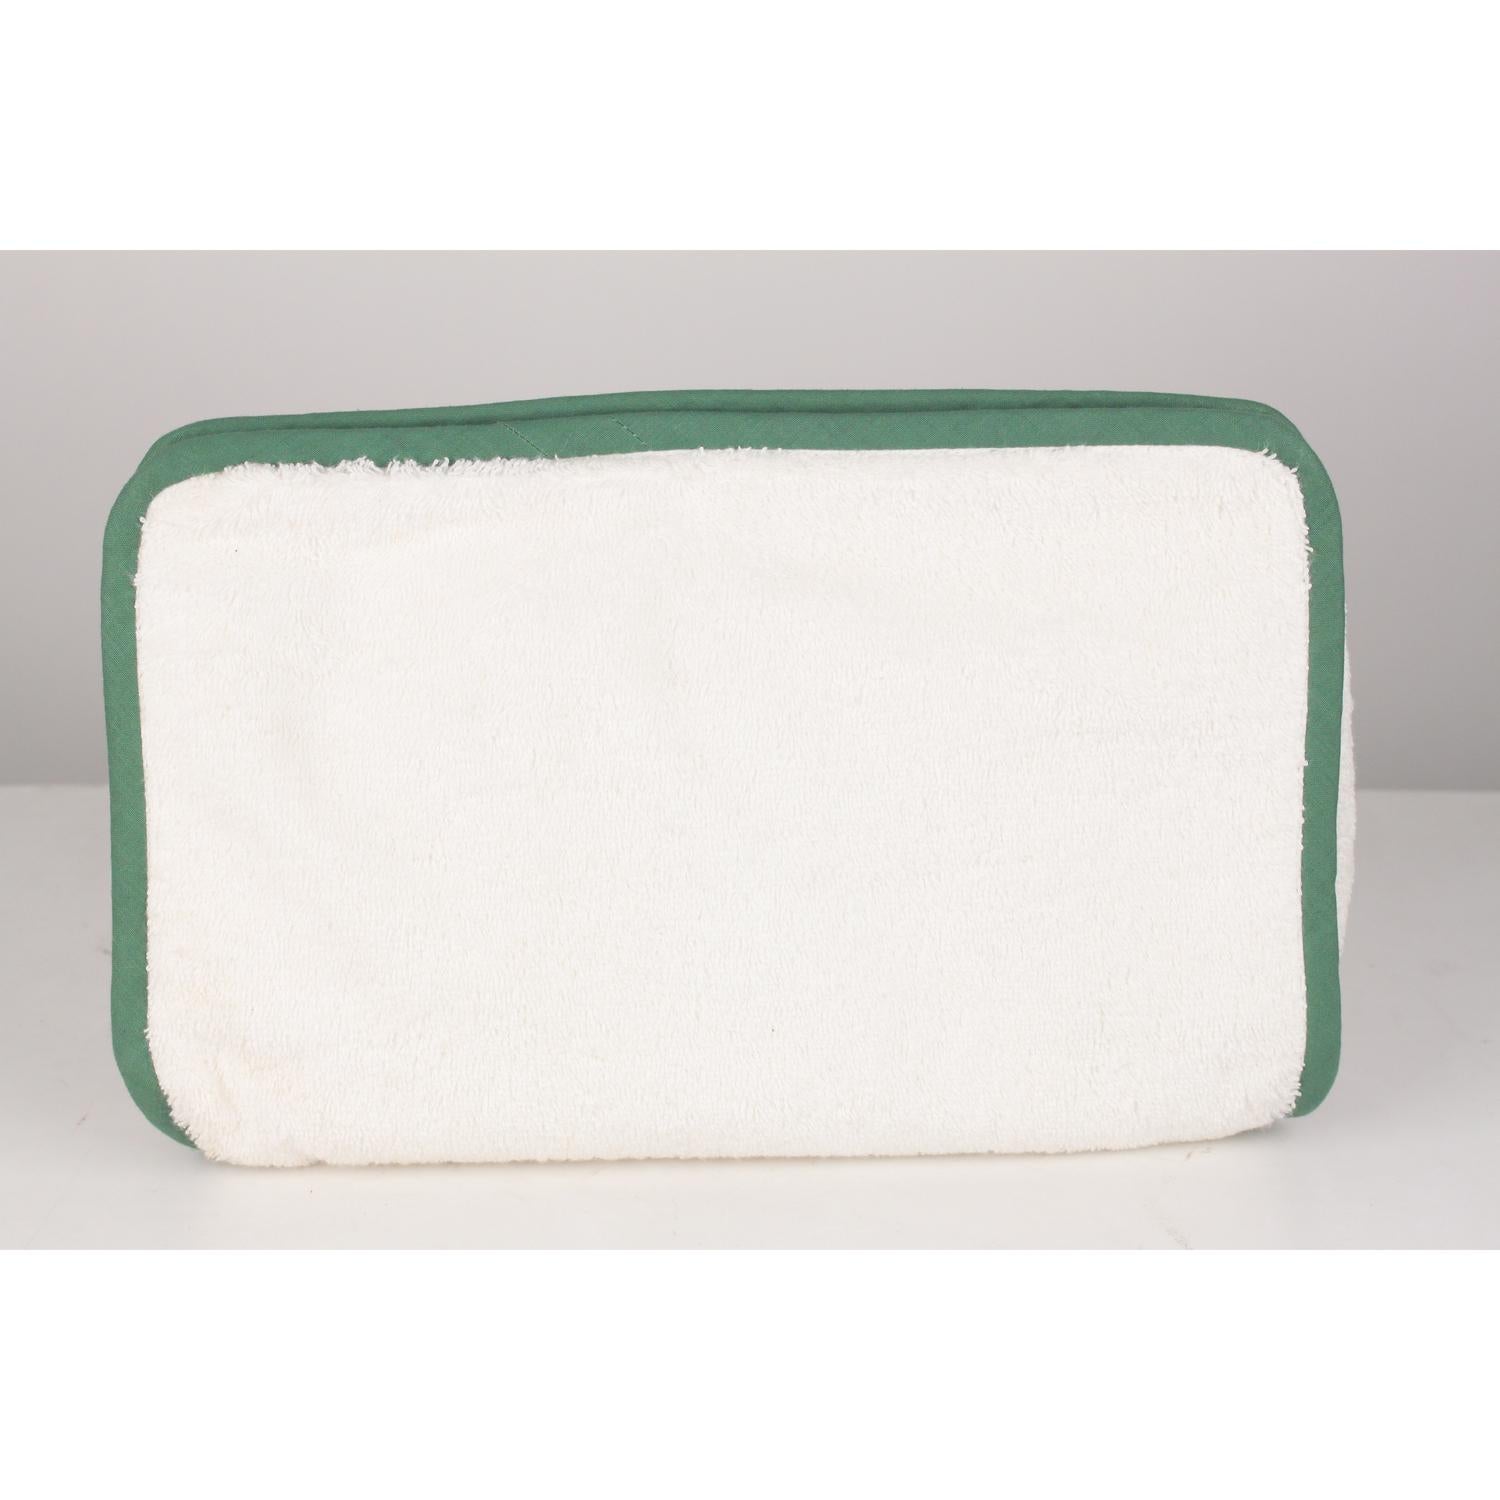 Women's Hermes Paris White Terry Cloth Cotton Cosmetic Bag with Panda